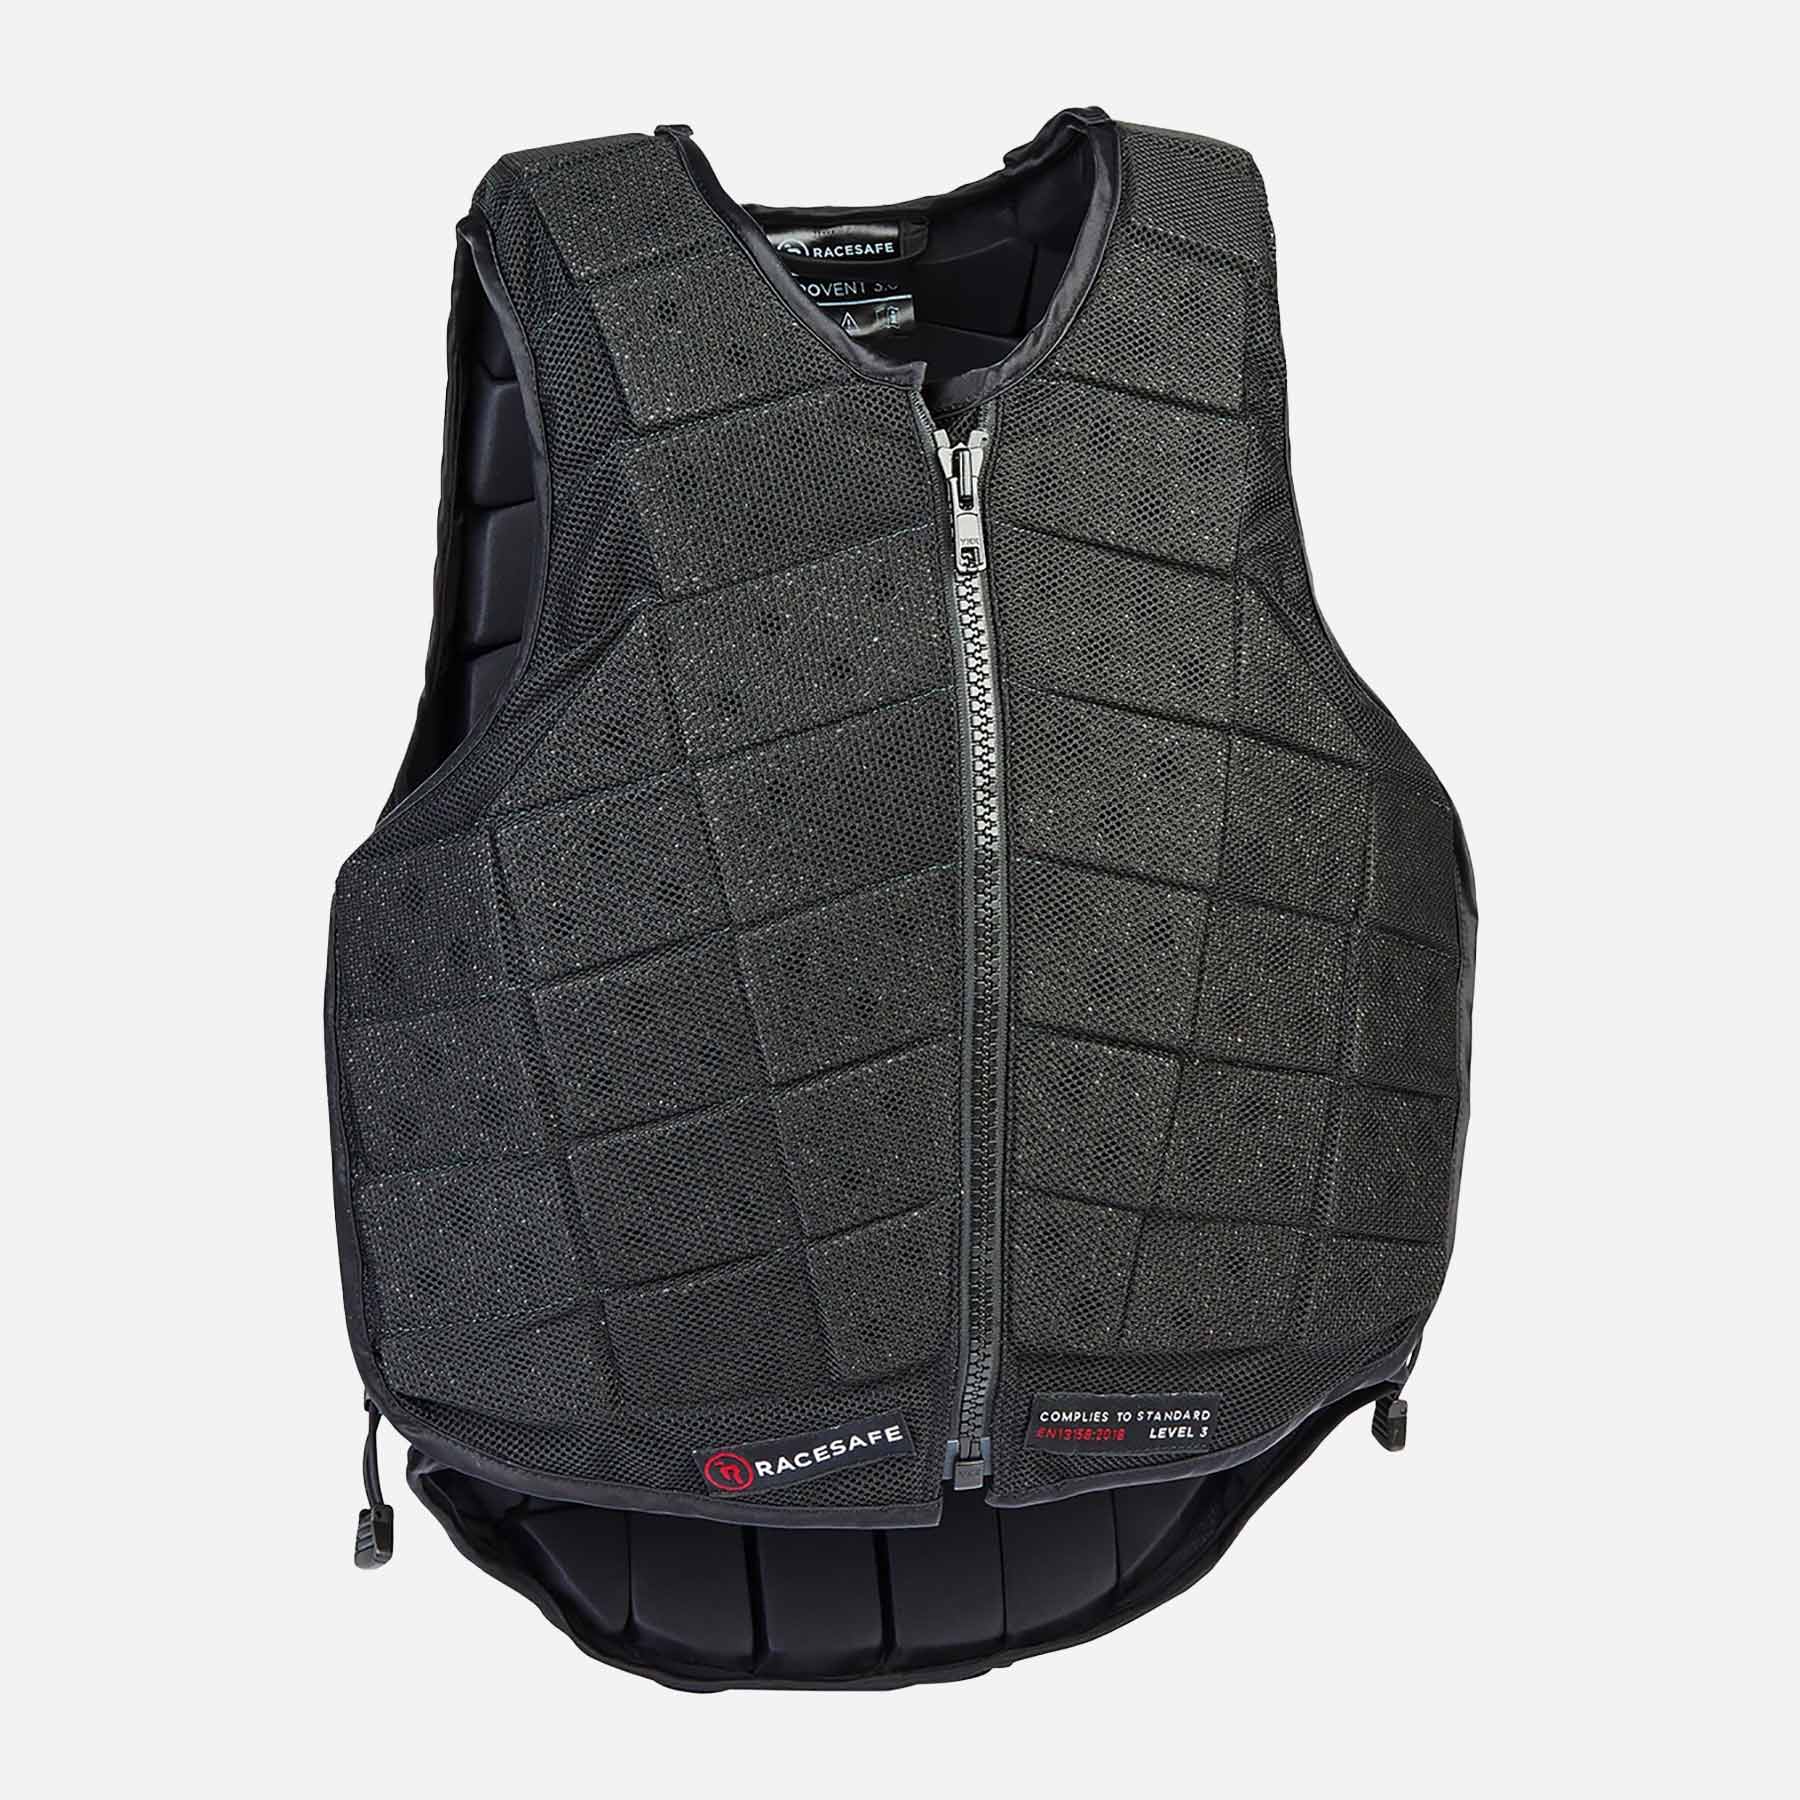 Racesafe Provent 3.0 Body Protector - Childs